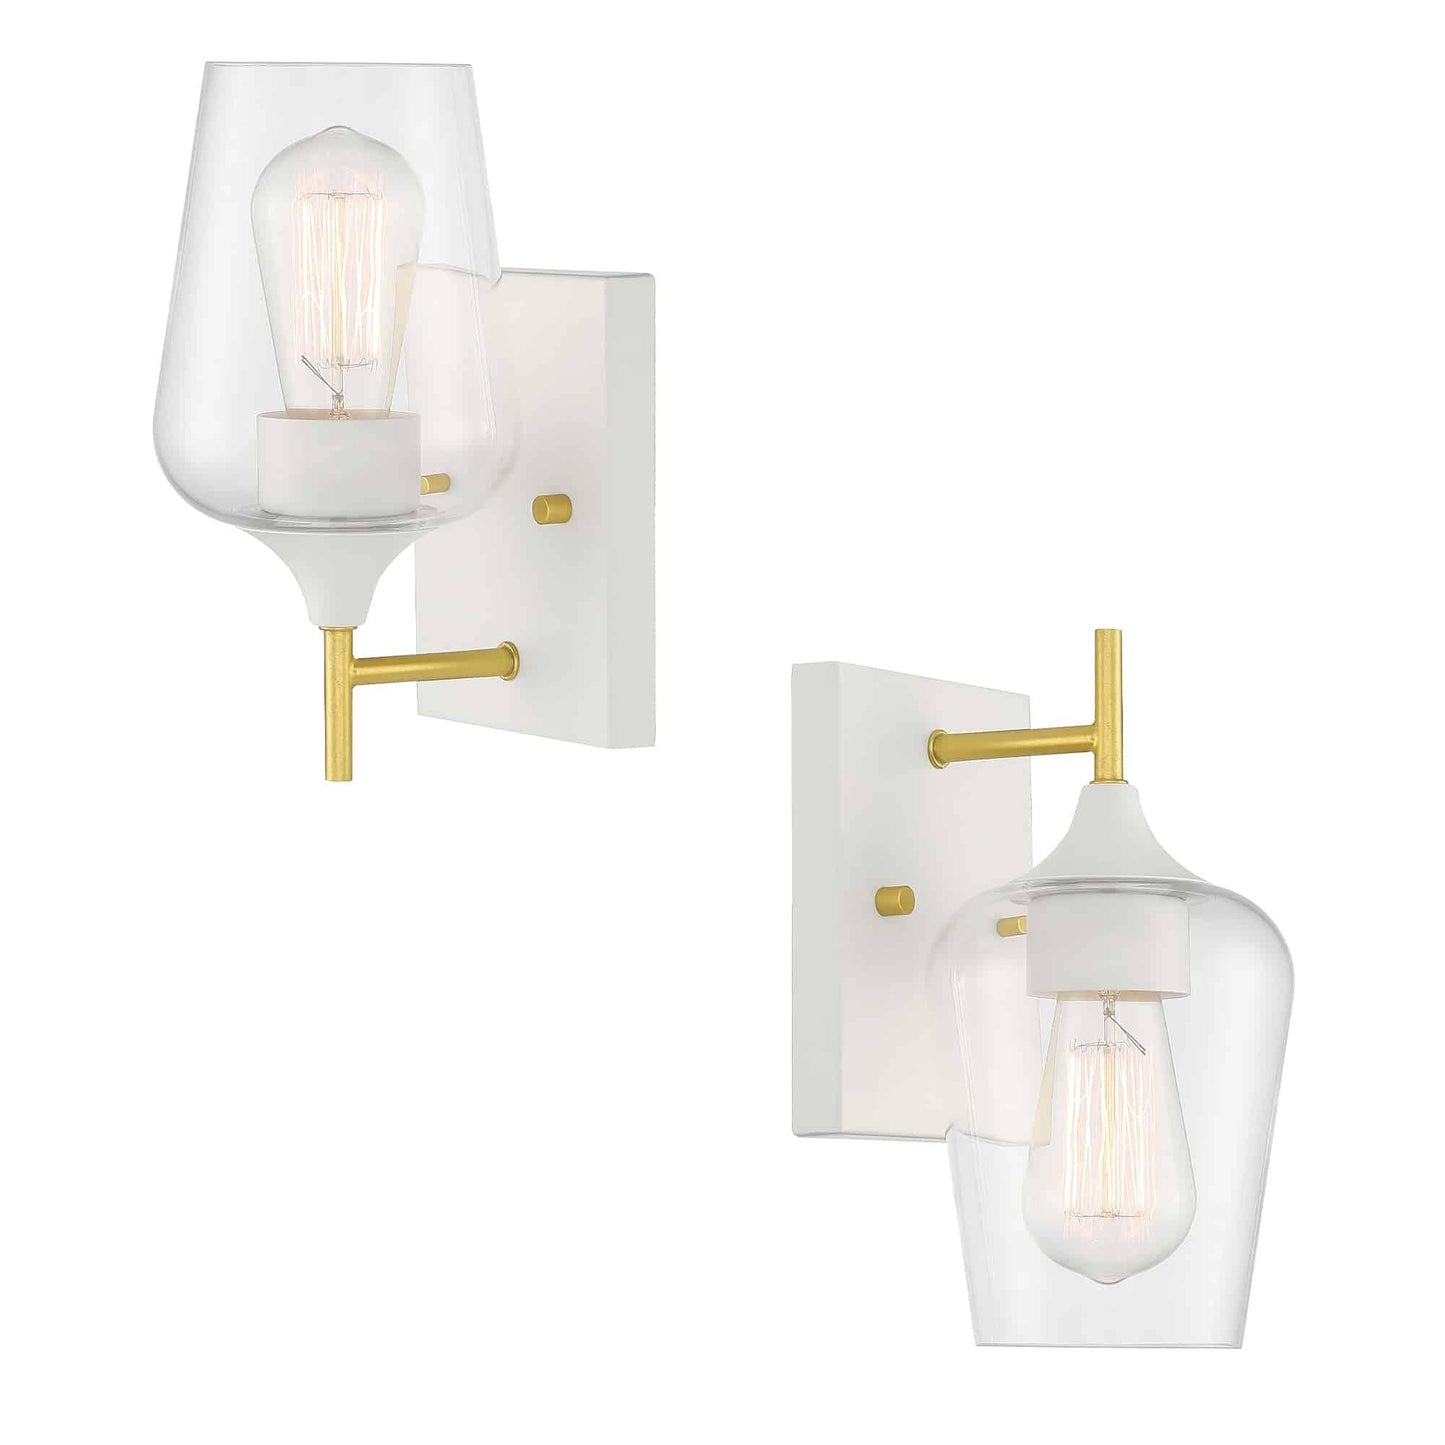 1 light glass wall sconce set of 2 (39) by ACROMA